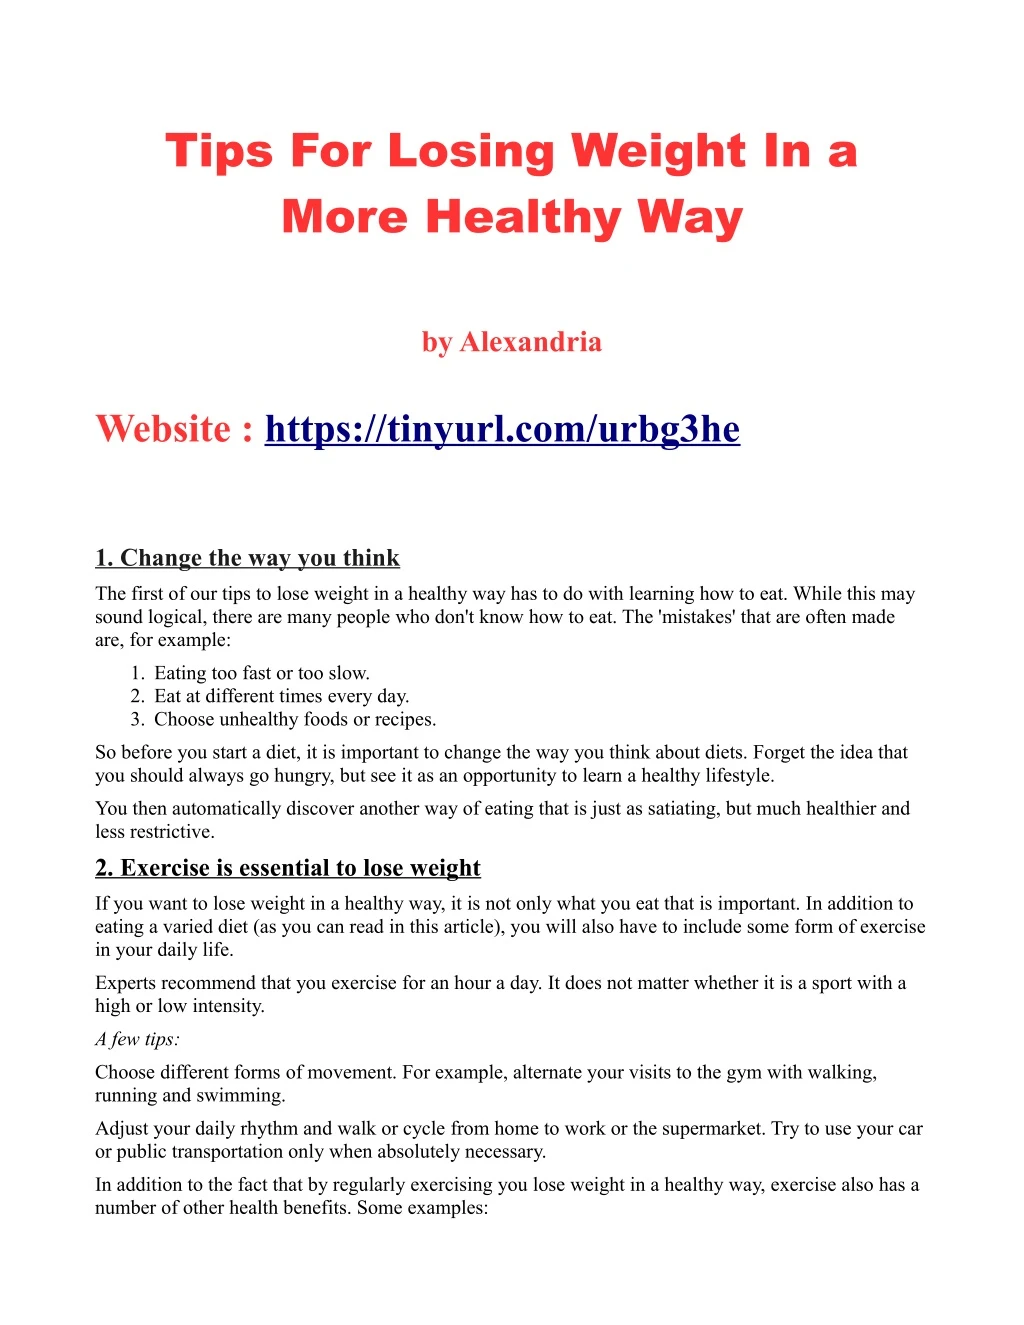 tips for losing weight in a more healthy way